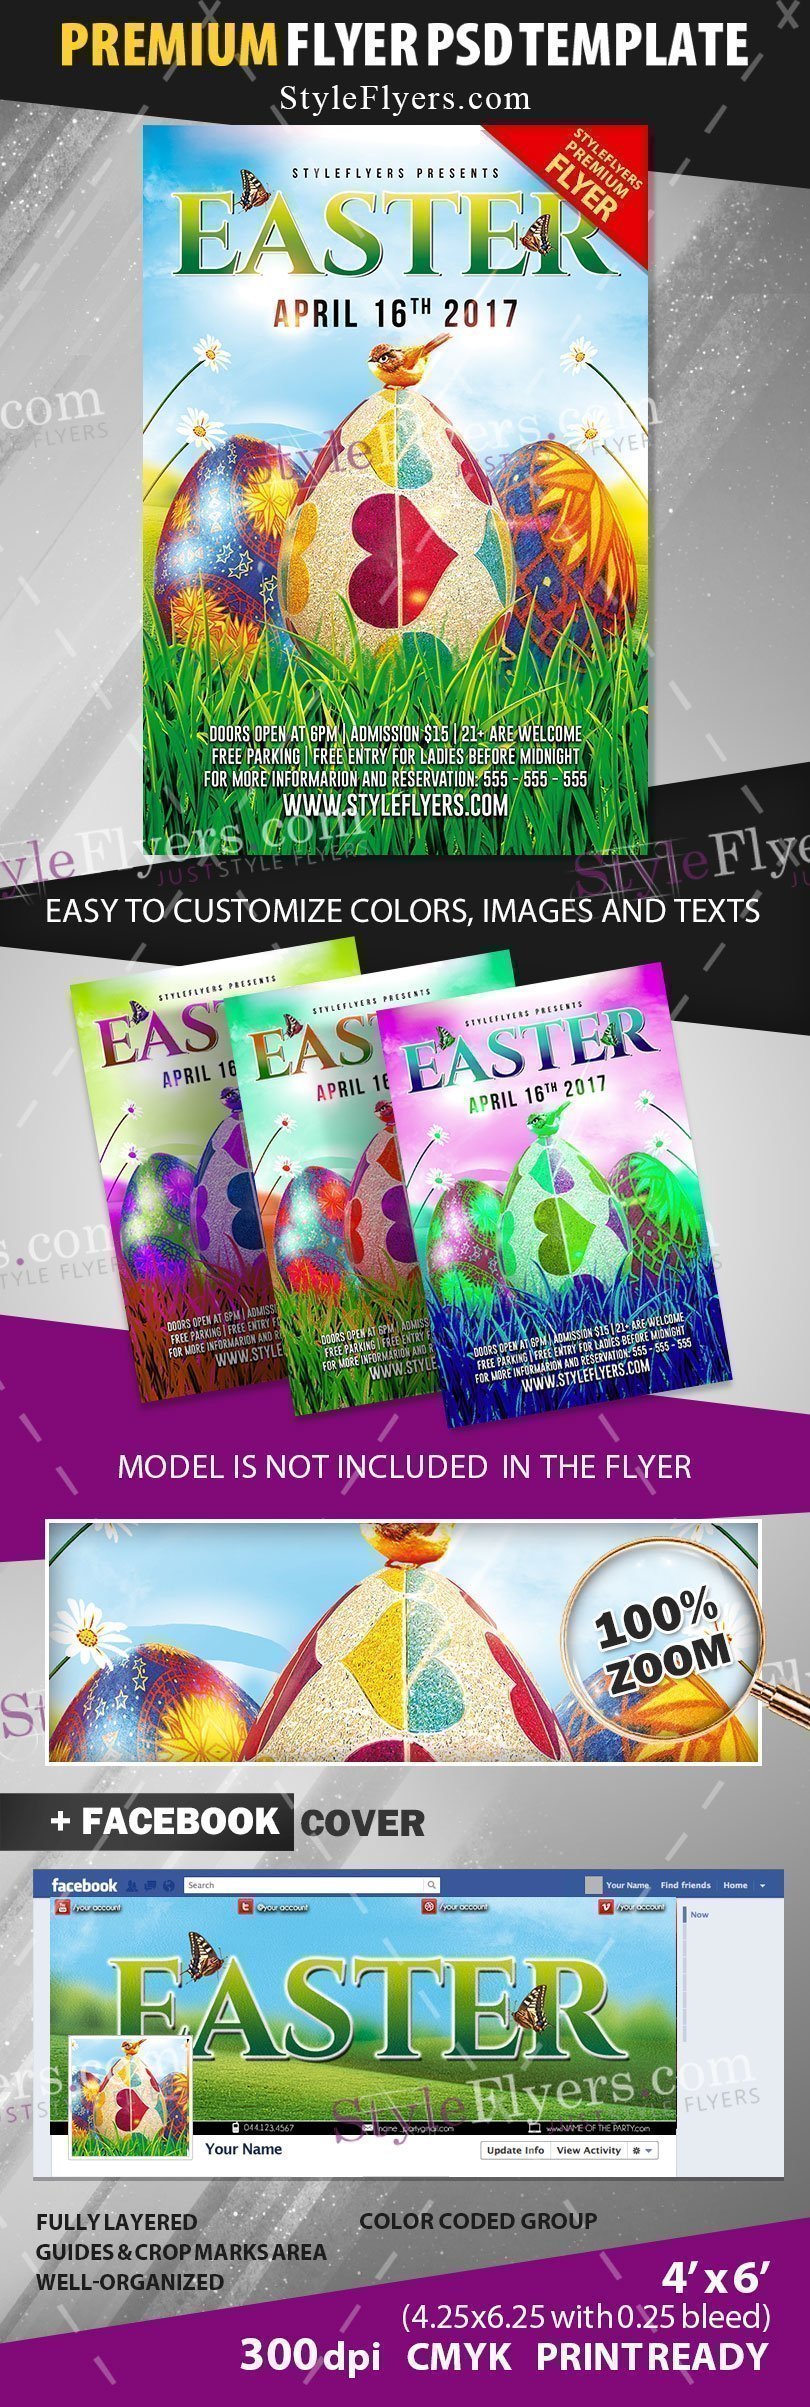 preview_easter_Flyer_premium_template